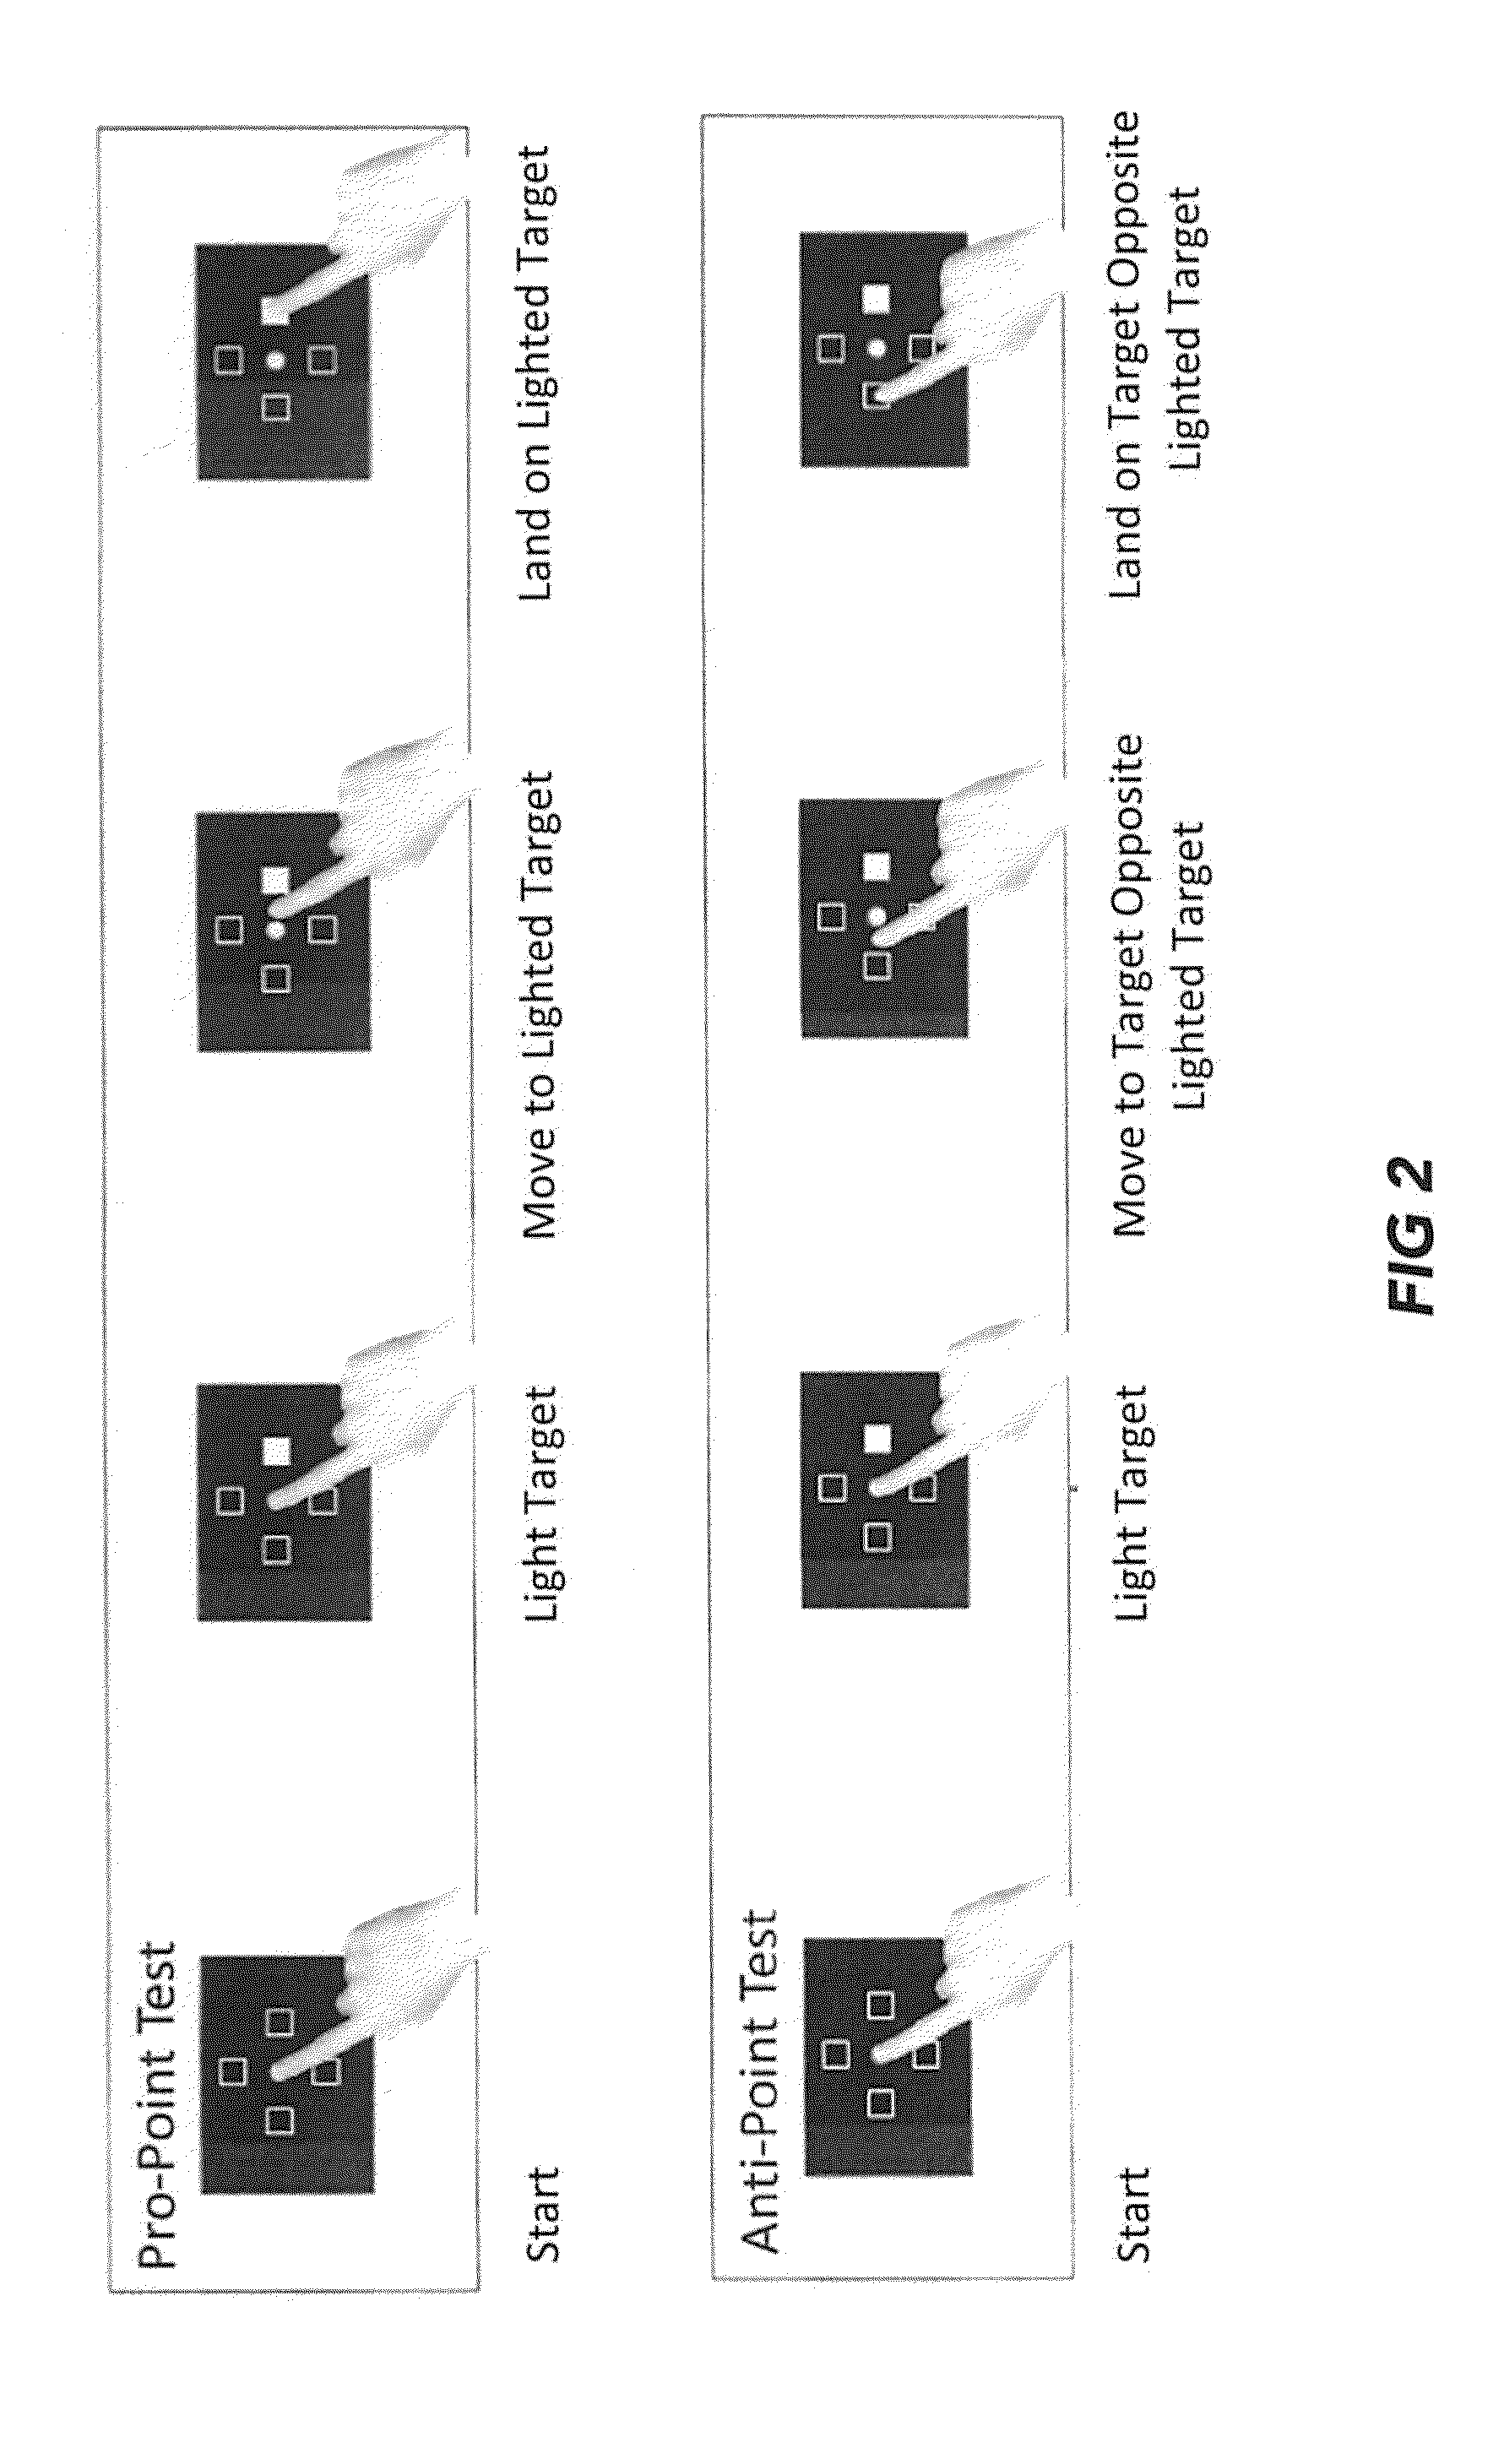 Touch sensitive system and method for cognitive and behavioral testing and evaluation